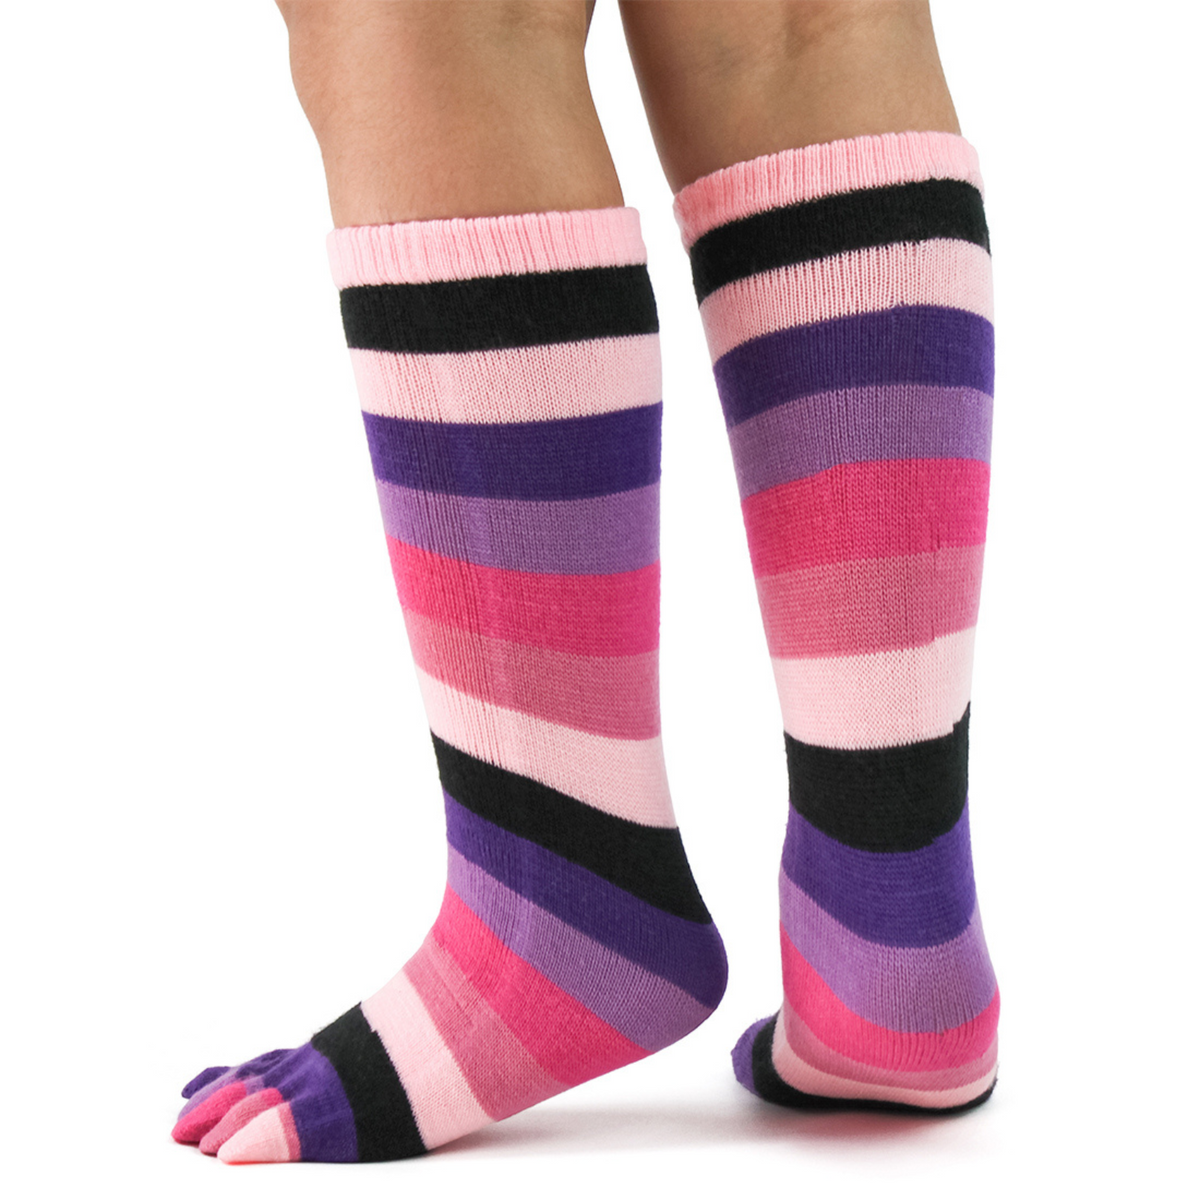 Foot Traffic Pink Stripe knee high Toe Socks kids&#39; featuring shades of pink and purple stripes worn by model from back